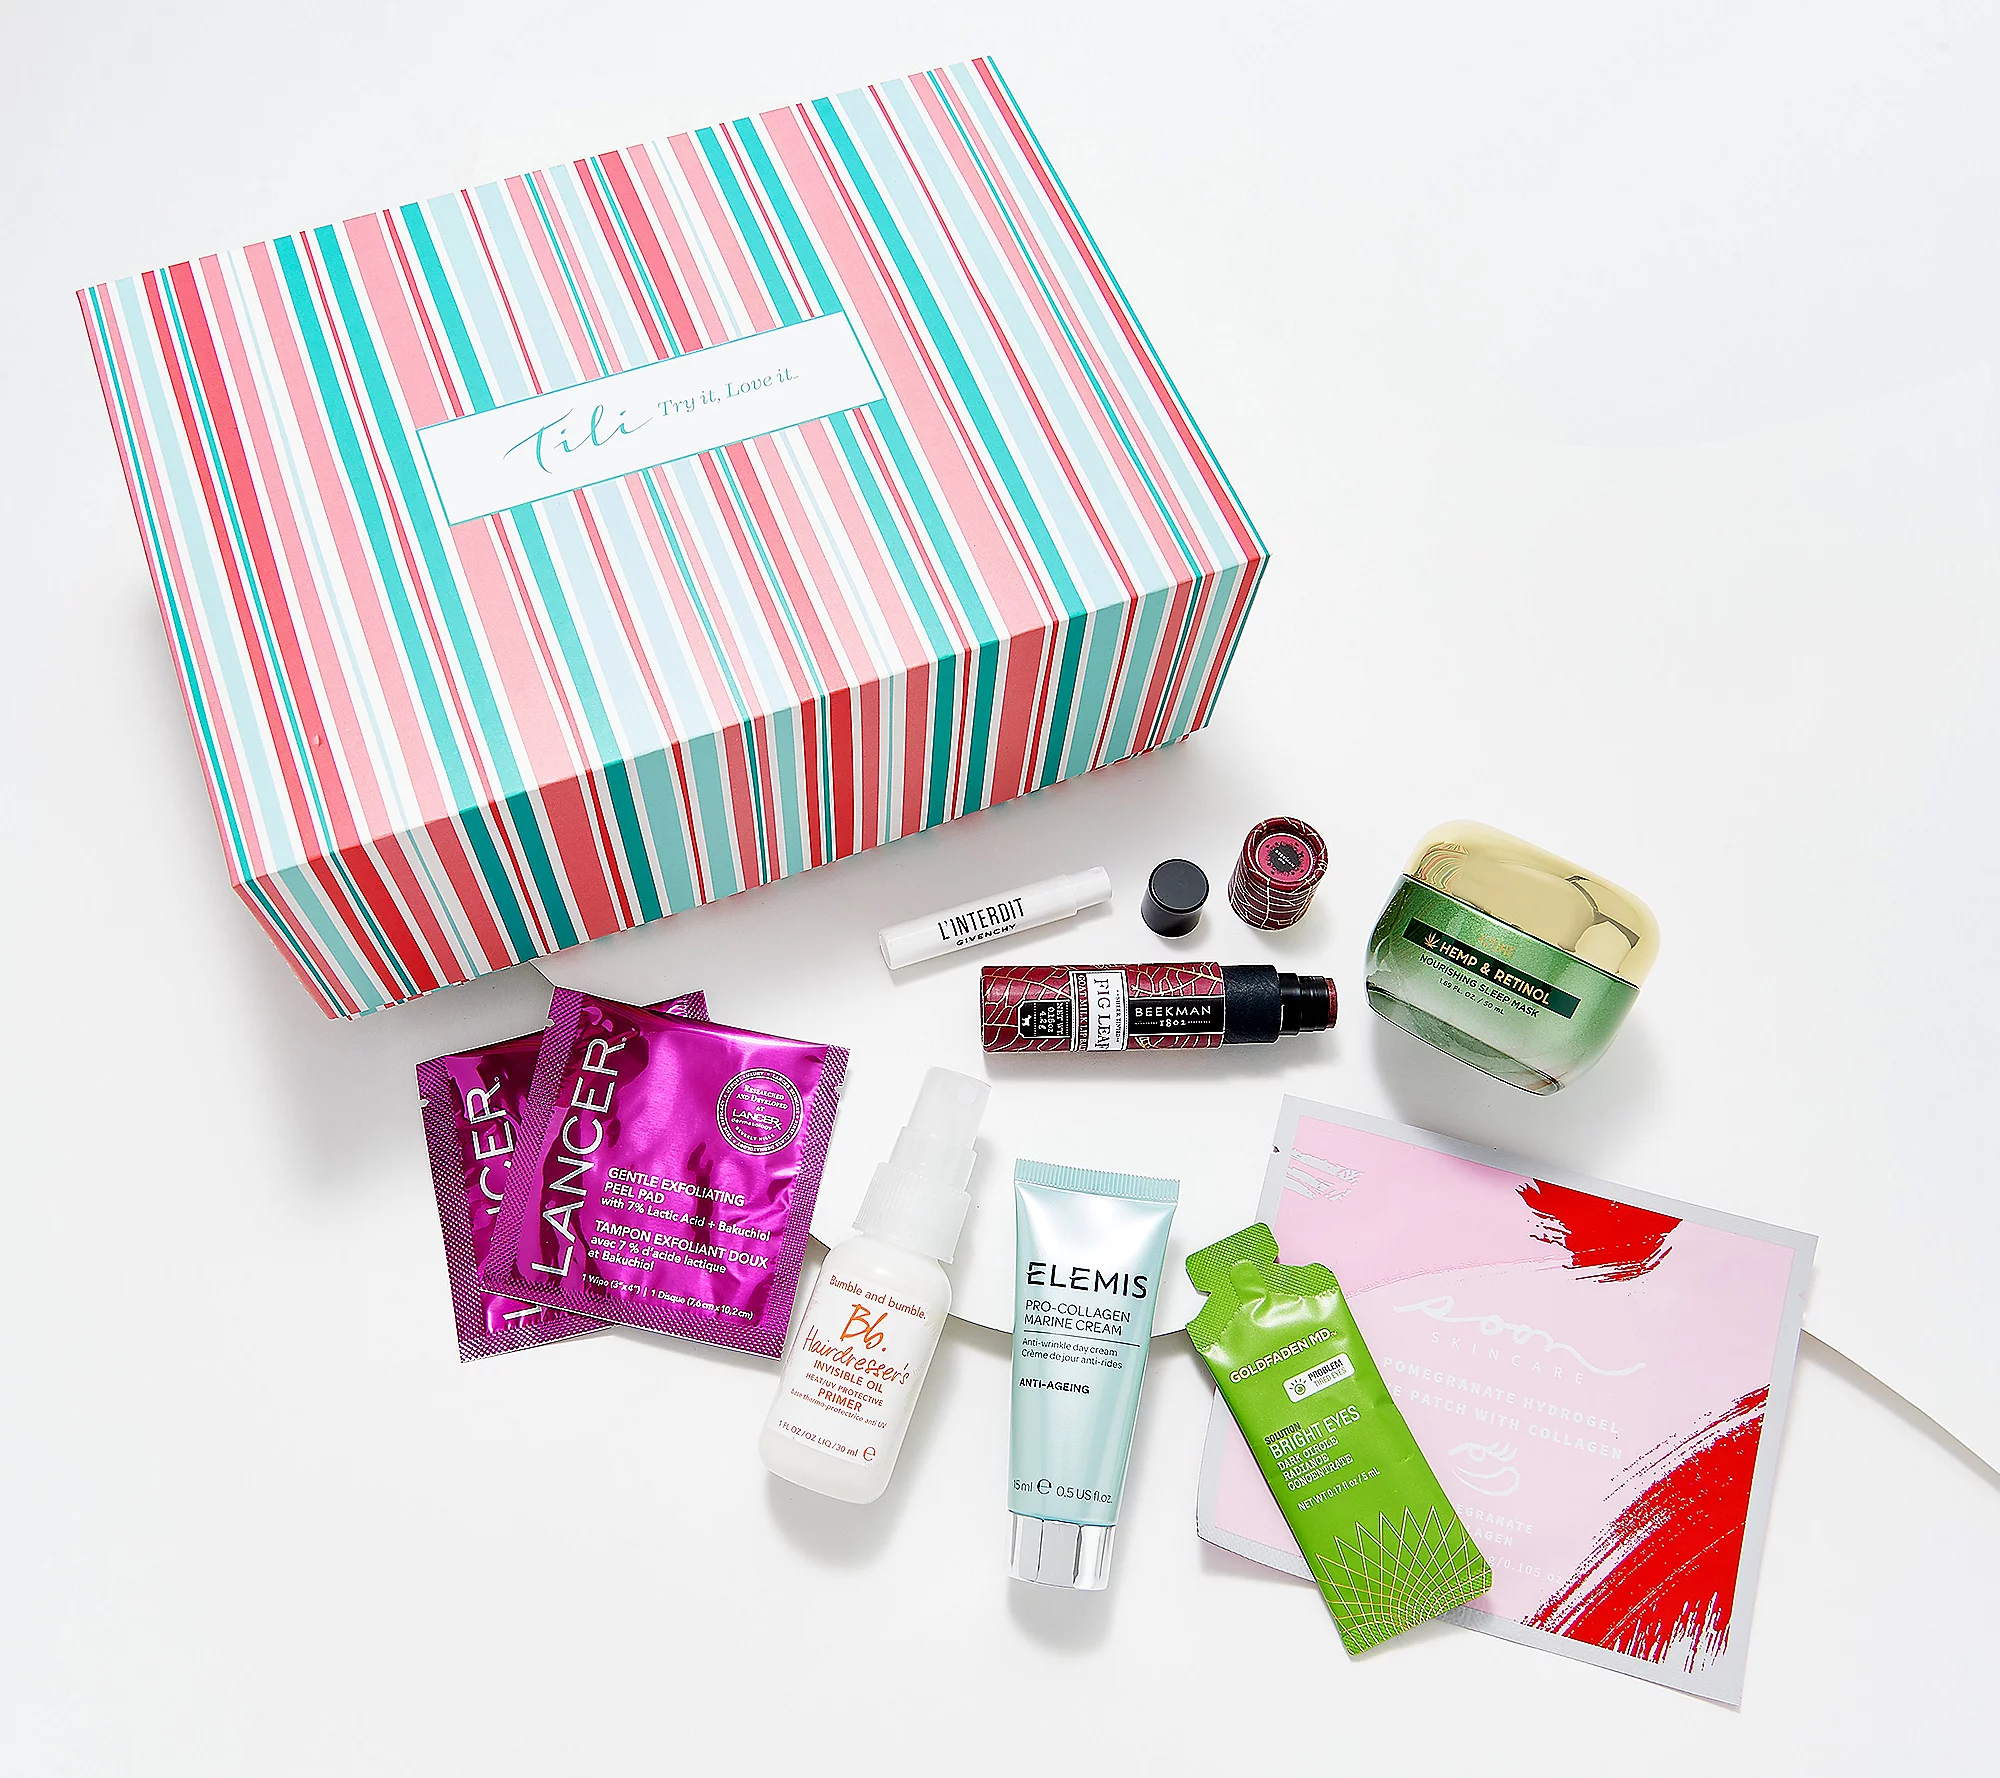 QVC TILI Try It, Love It 8-Piece Beauty Buyer’s Pick Sample Box Is Available